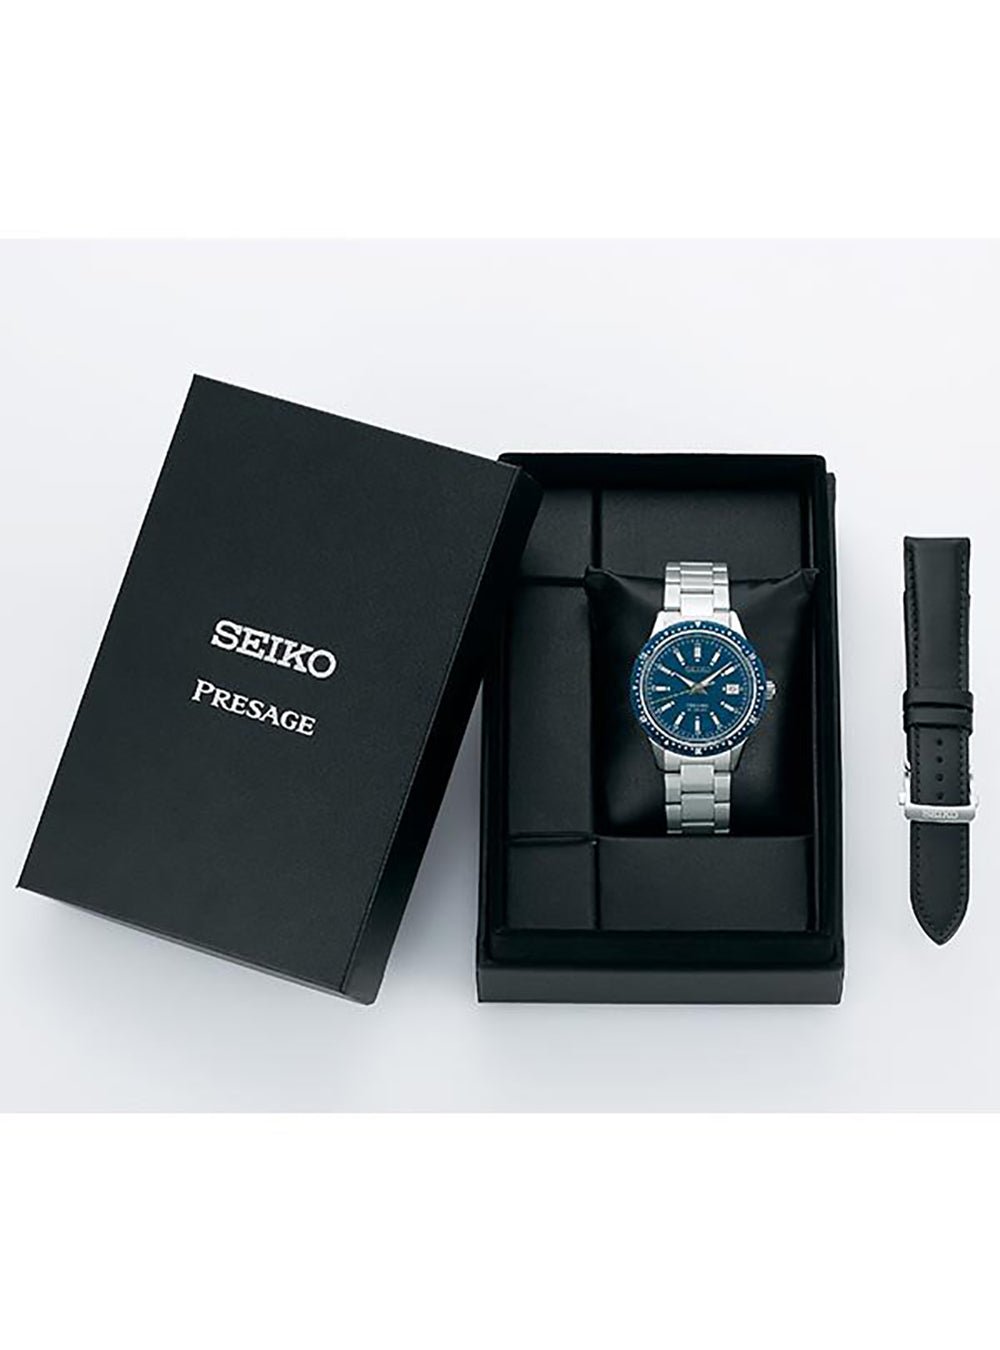 SEIKO PRESAGE JAPAN COLLECTION 2020 LIMITED EDITION SARX081 MADE IN JAPAN  JDM